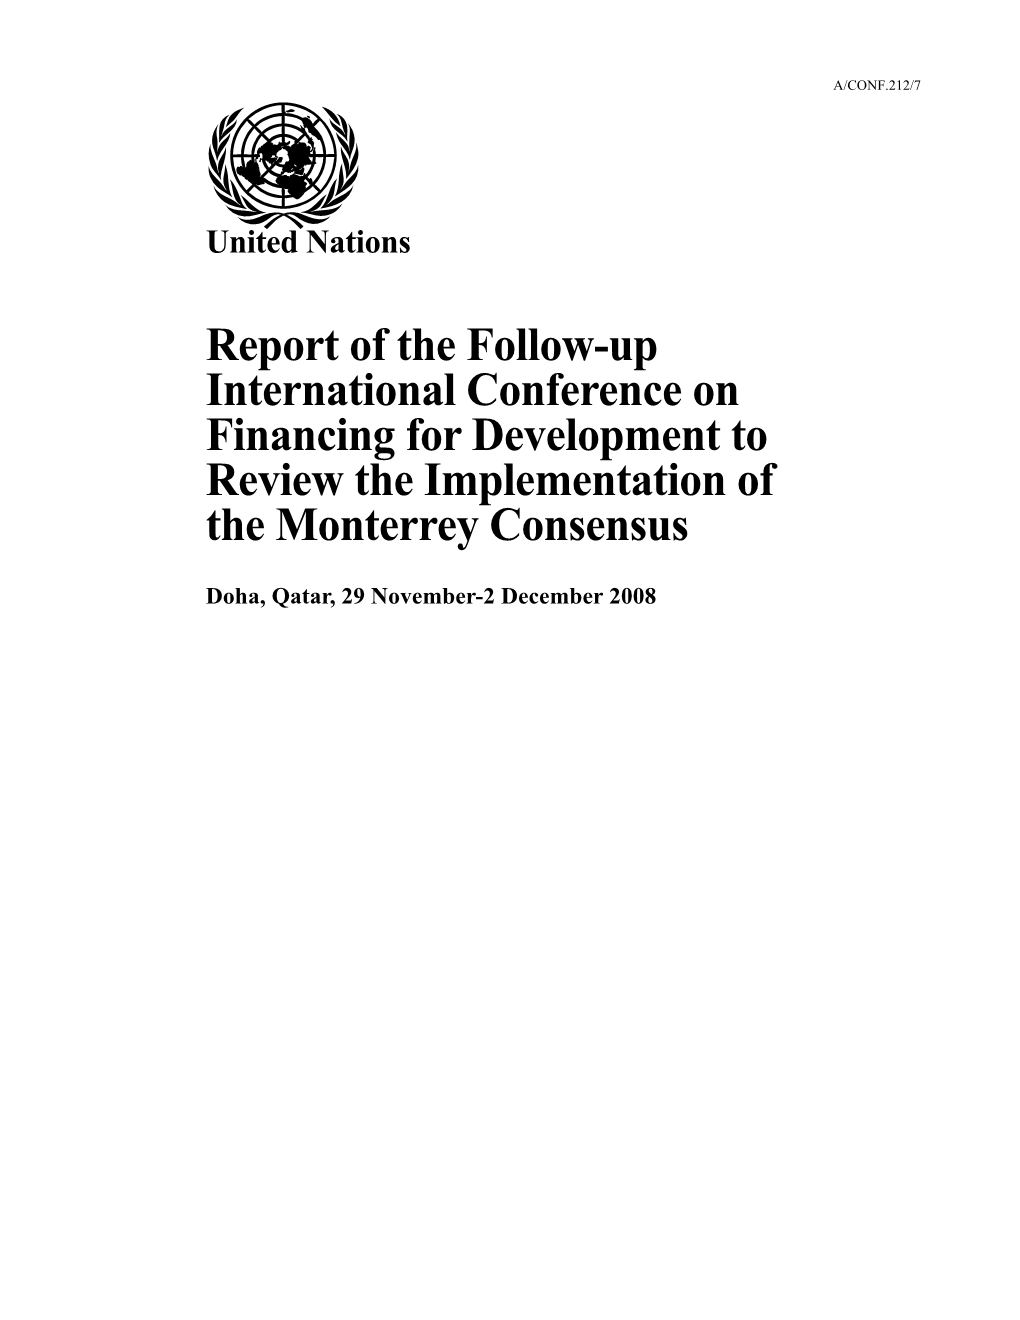 Report of the Follow-Up International Conference on Financing for Development to Review the Implementation of the Monterrey Consensus